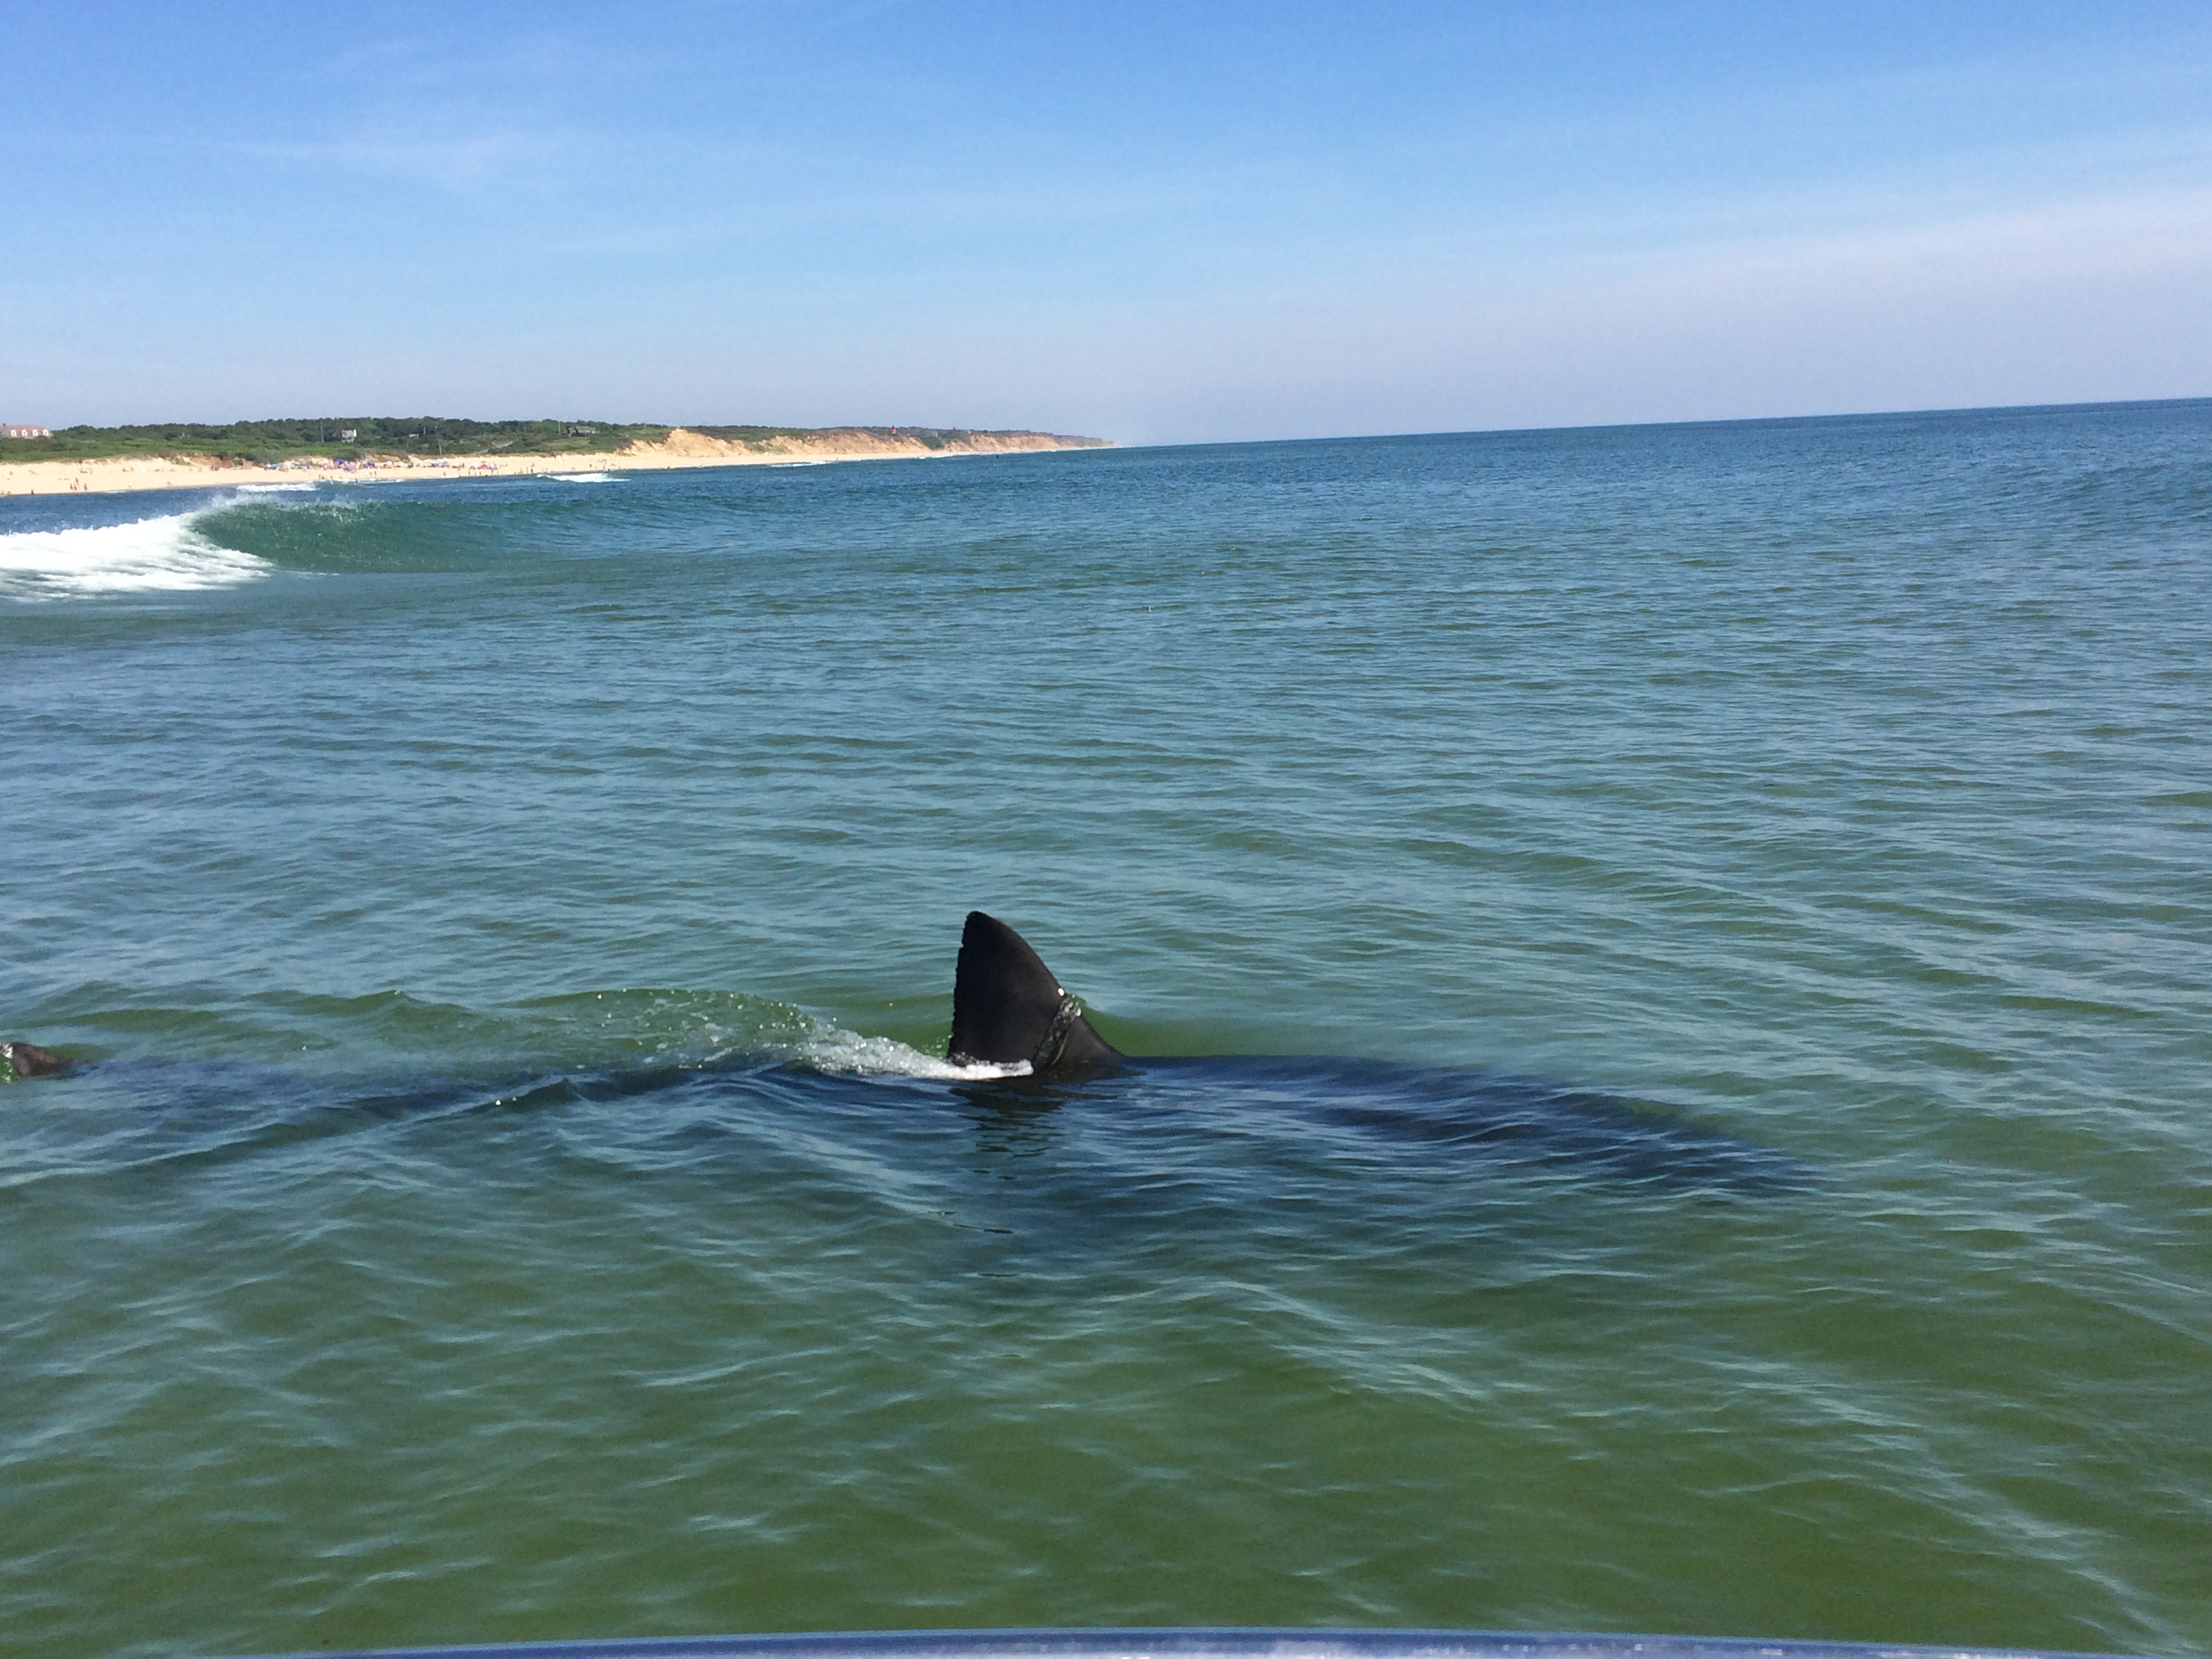 A view of the ocean near the shore, with shark fin above the water, and shadowy view of shark under the water